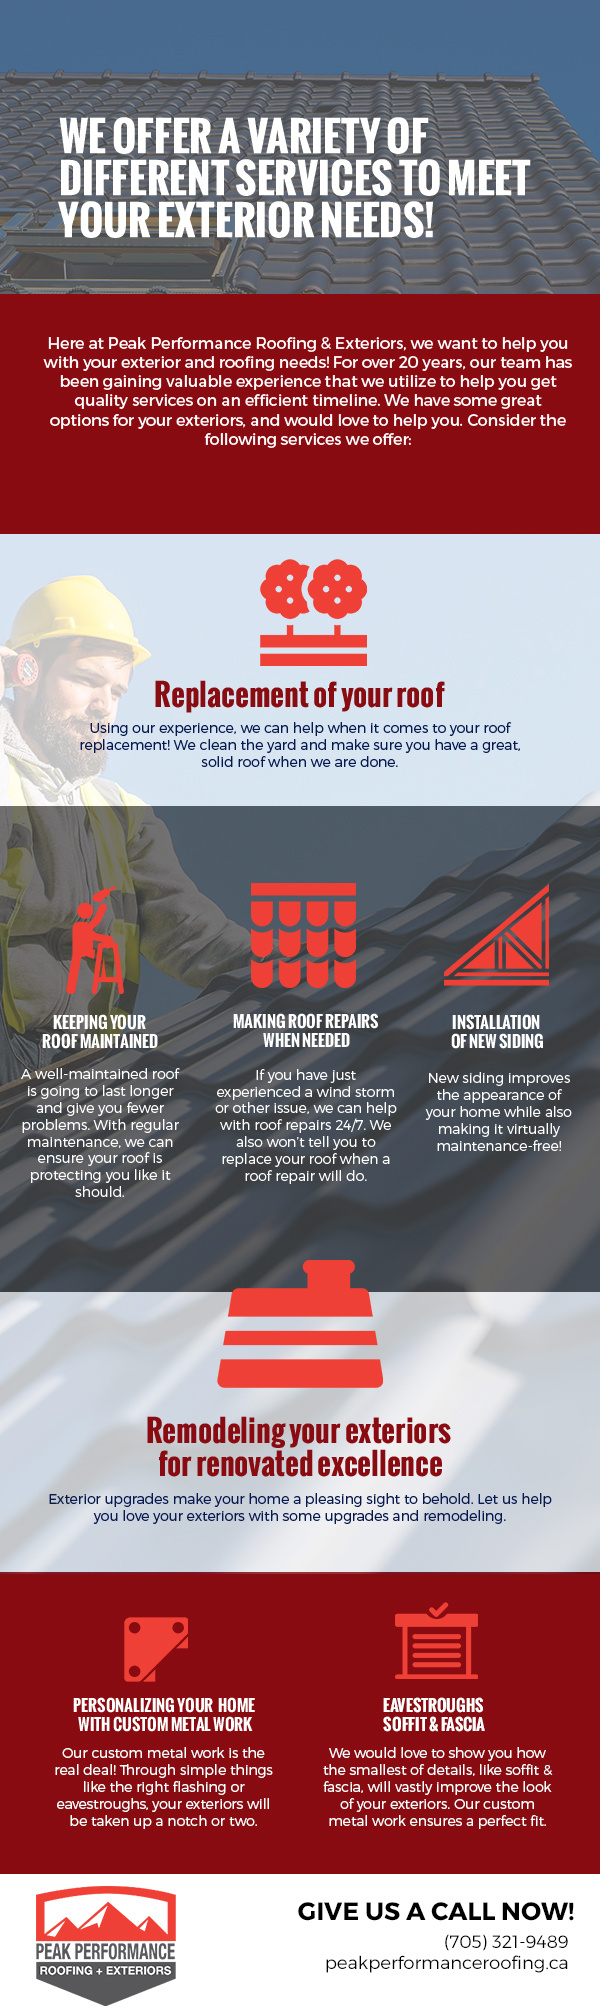 We Offer a Variety of Different Services to Meet Your Exterior Needs! [infographic]